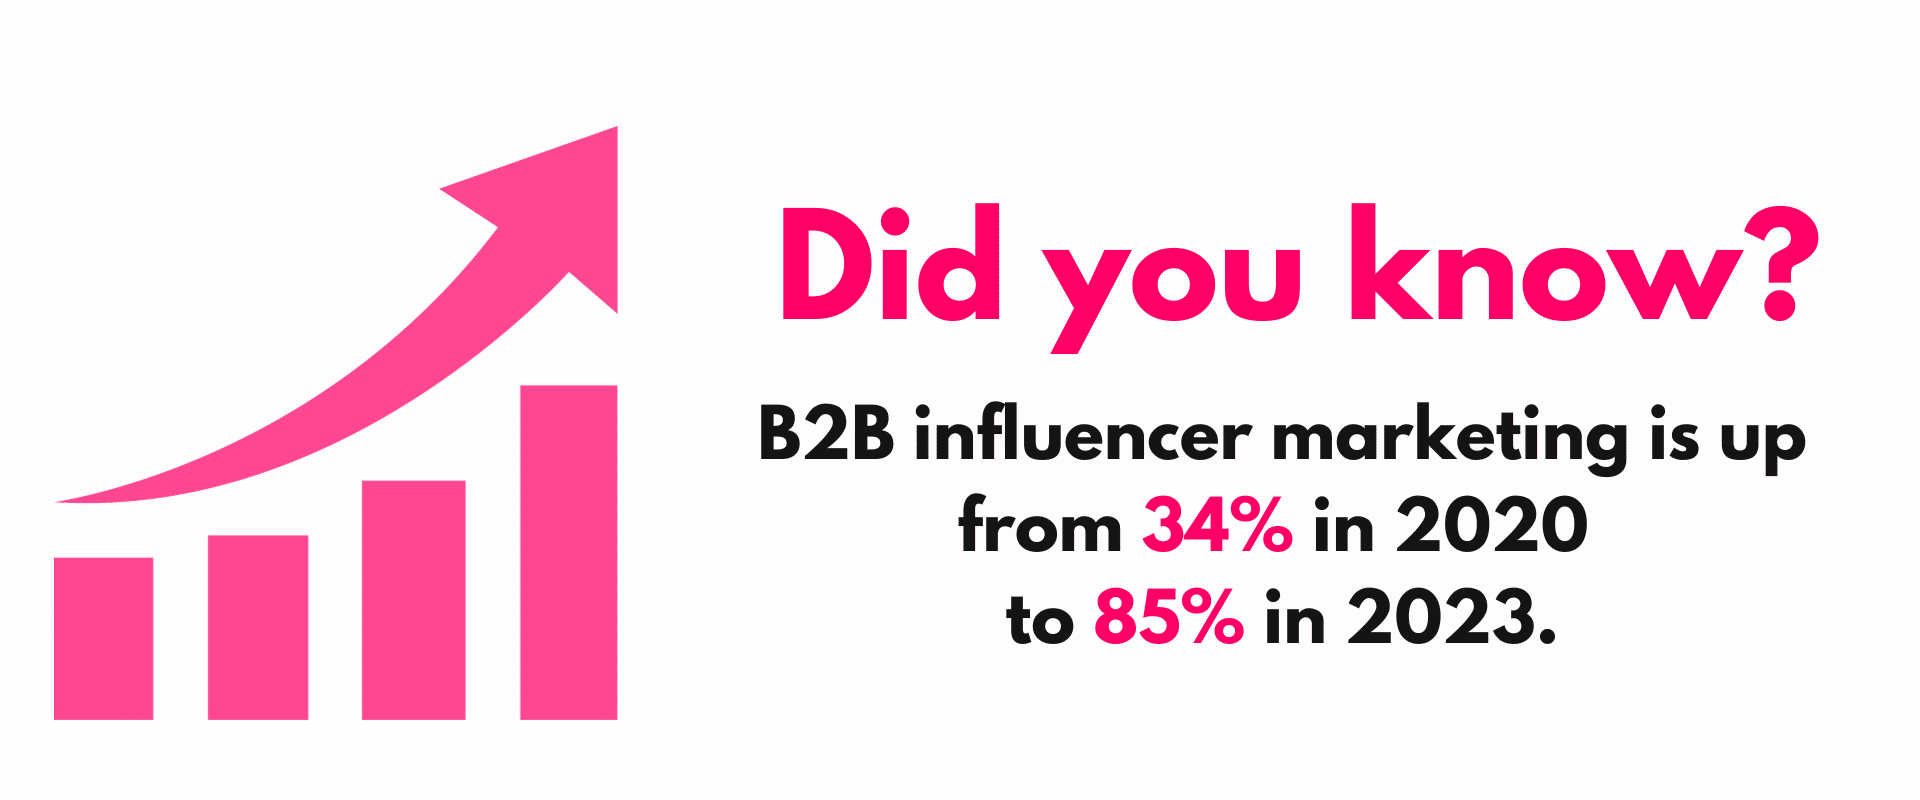 Did you know? b2b influence marketing is up from 20% in 2020.